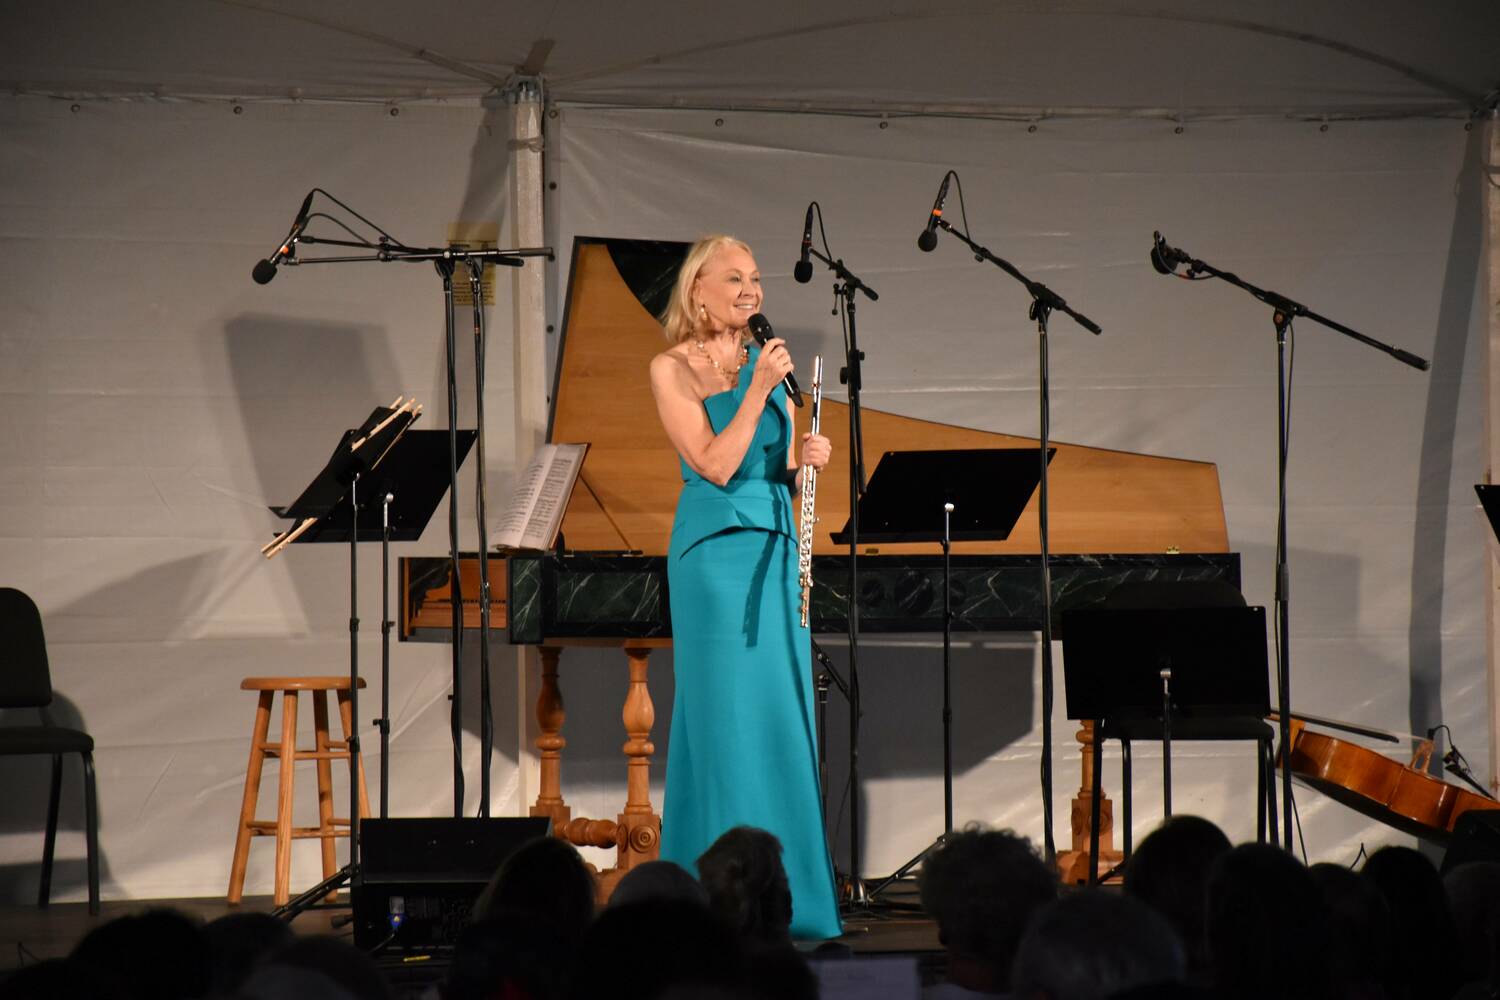 Marya Martin, founder of the Bridgehampton Chamber Music Festival, speaks at the 2022 Wm. Brian Little Concert at Channing Daughters Sculpture Garden. MICHAEL LAWRENCE